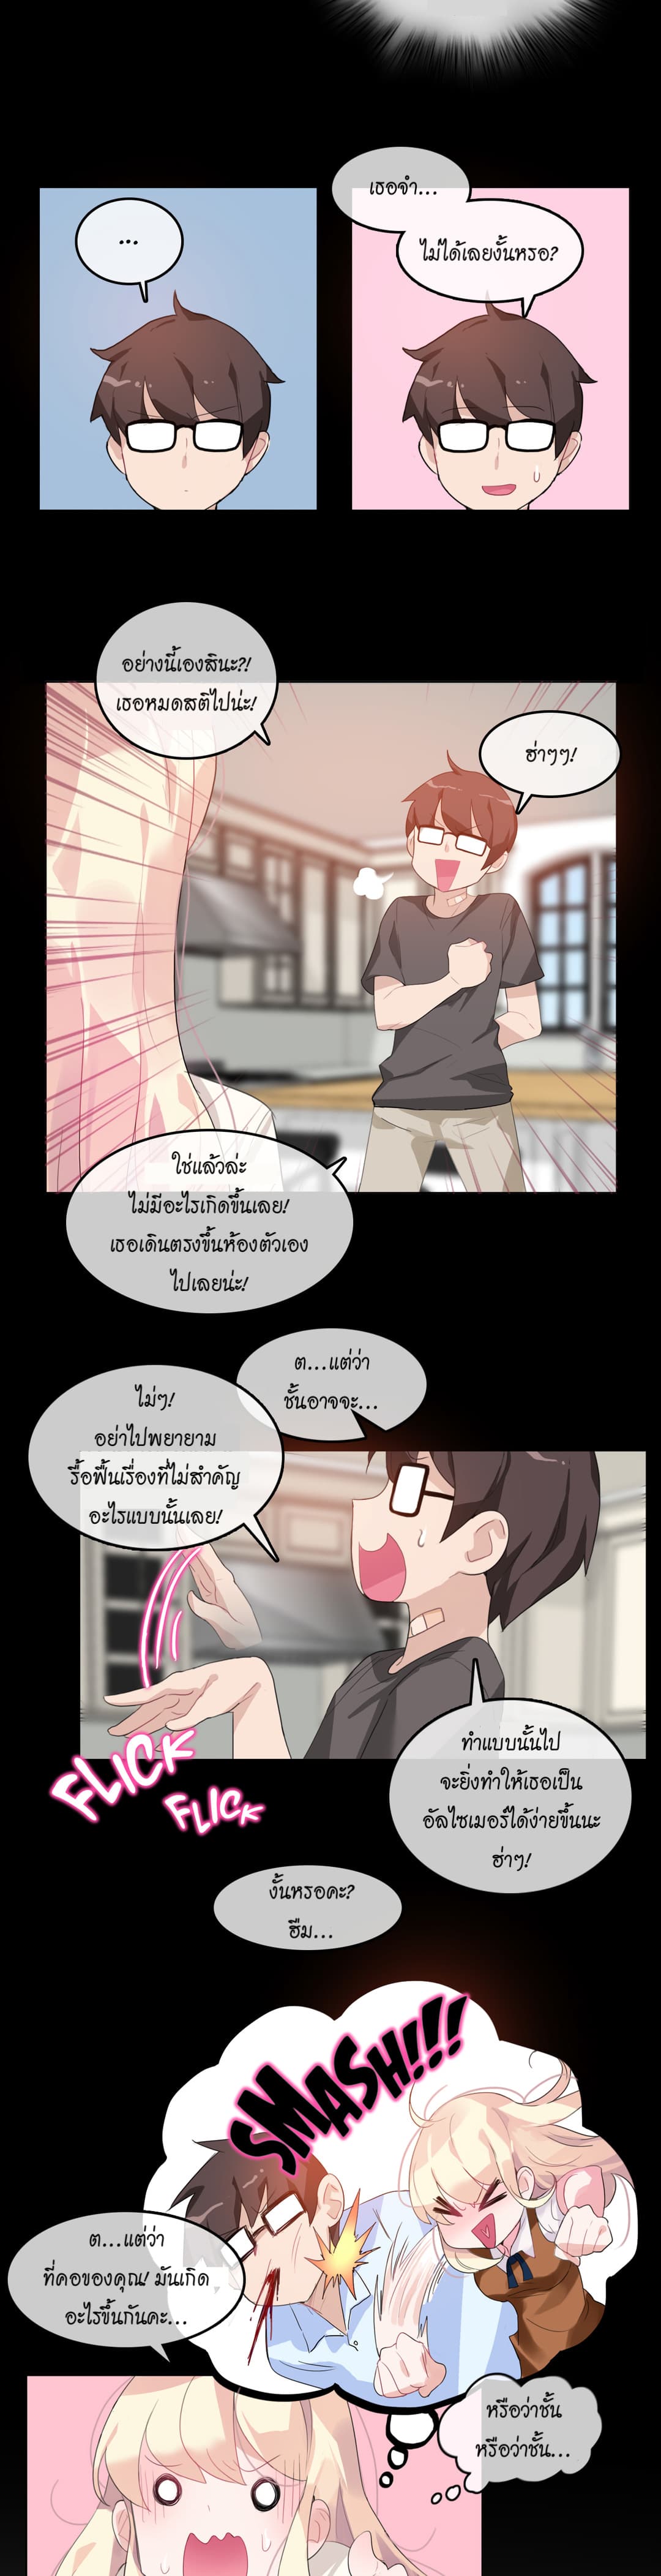 A Pervert’s Daily Life 12 (13)